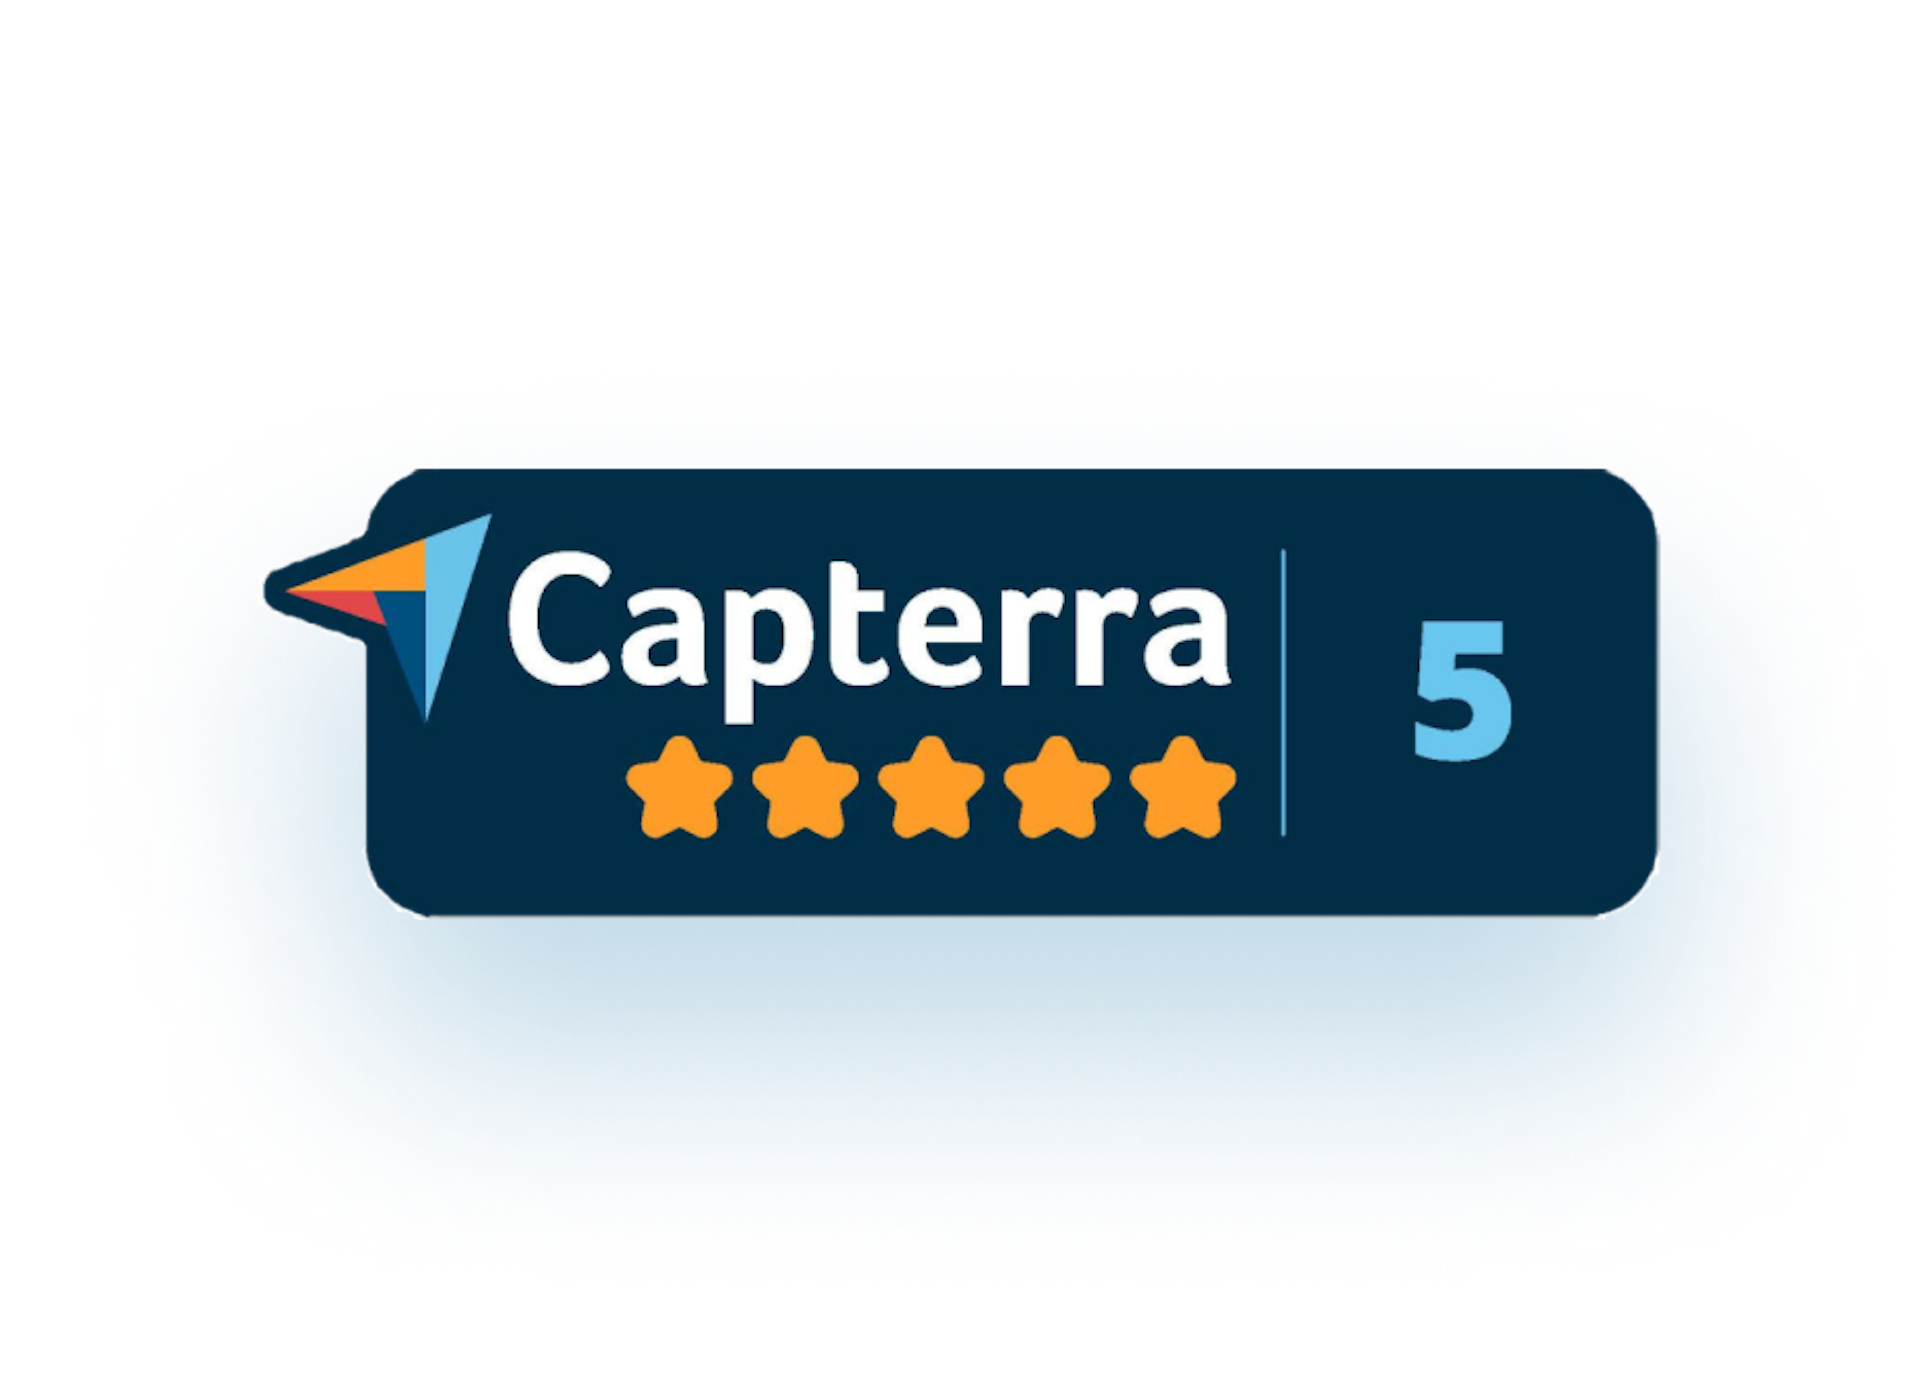 The Capterra badge with 5 star software rating